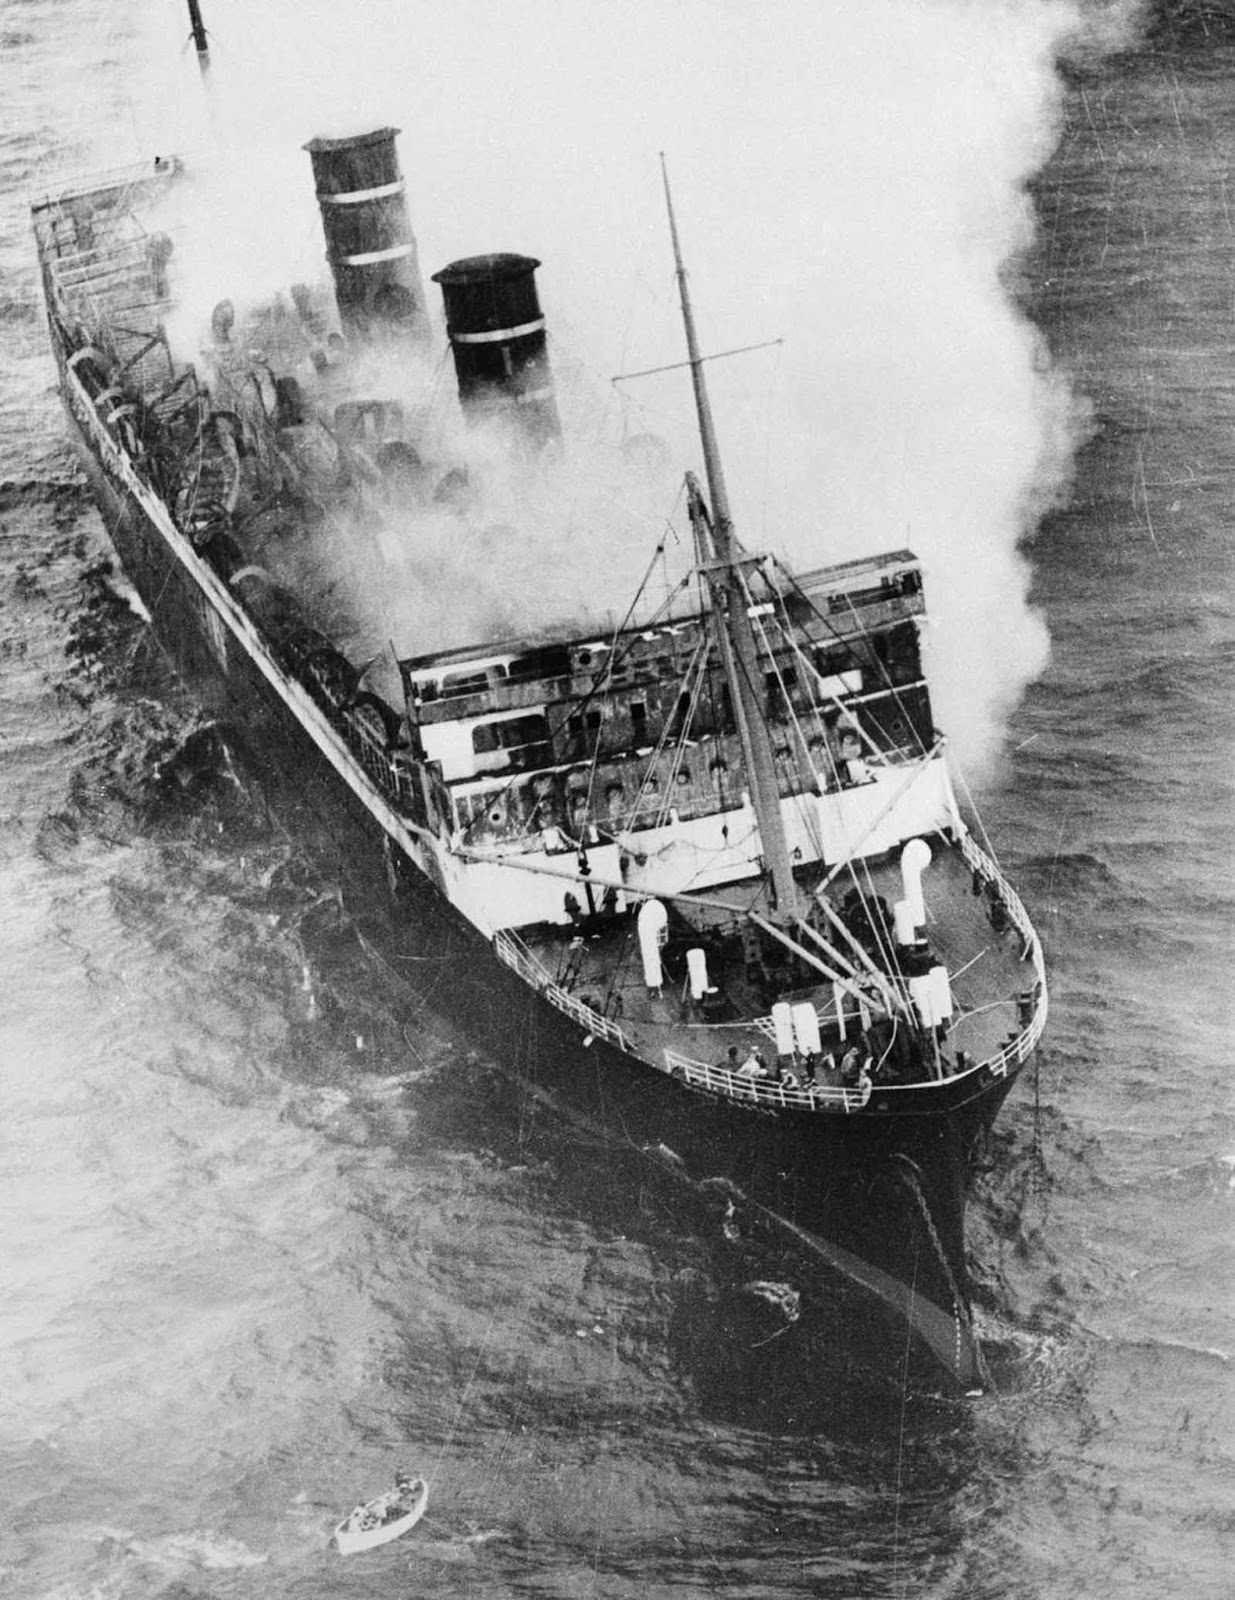 Smoke billows from the burning midsection of the ship as it drifts toward shore.